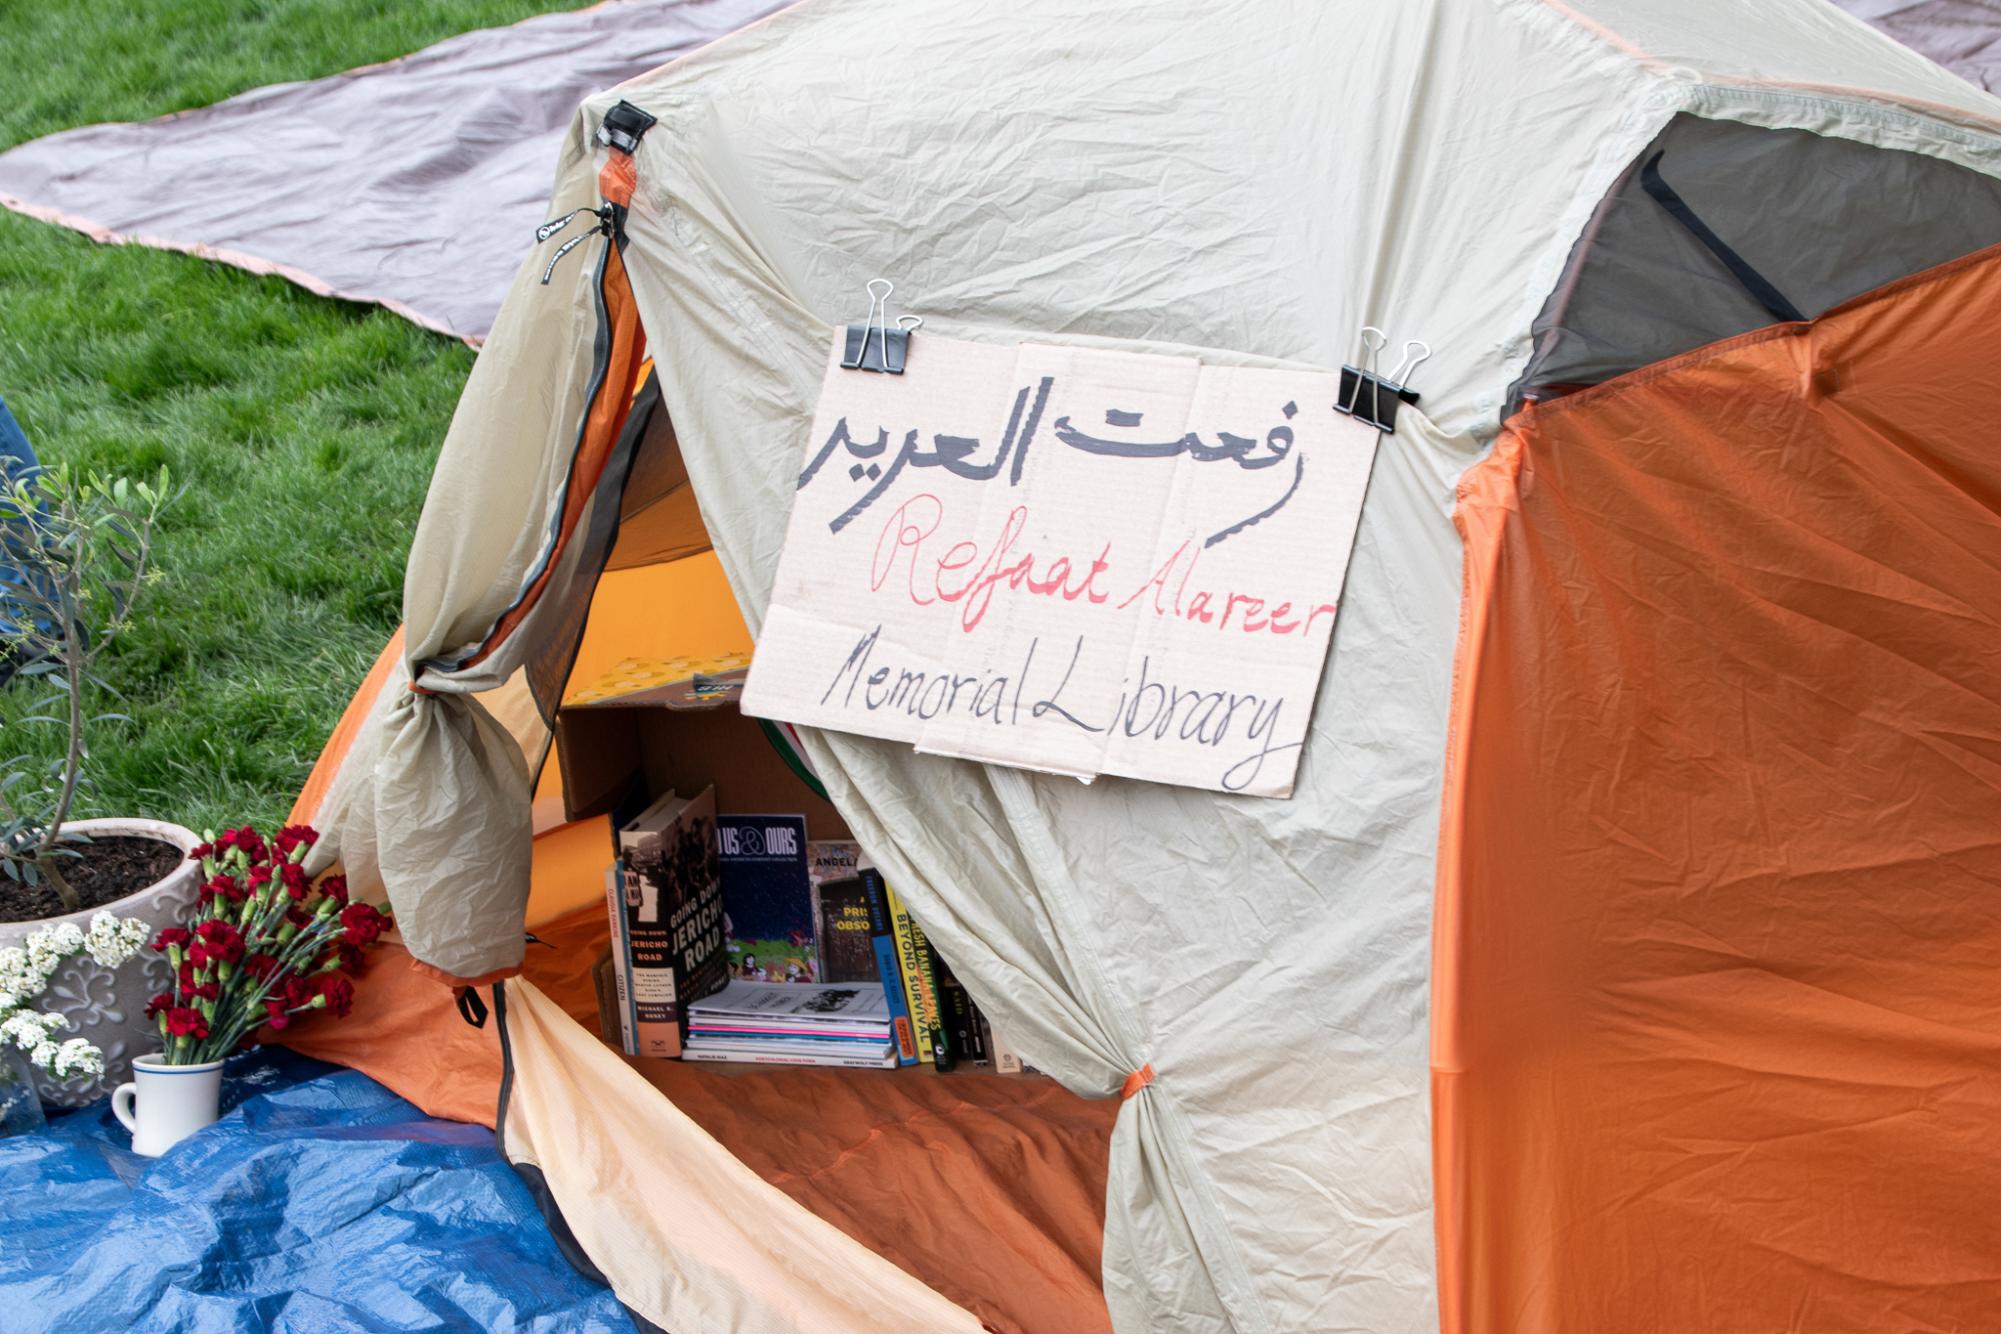 Demonstrators turn a tent into their “Memorial Library.” They stocked the tent with books as well as educational pamphlets for other demonstrators to read.